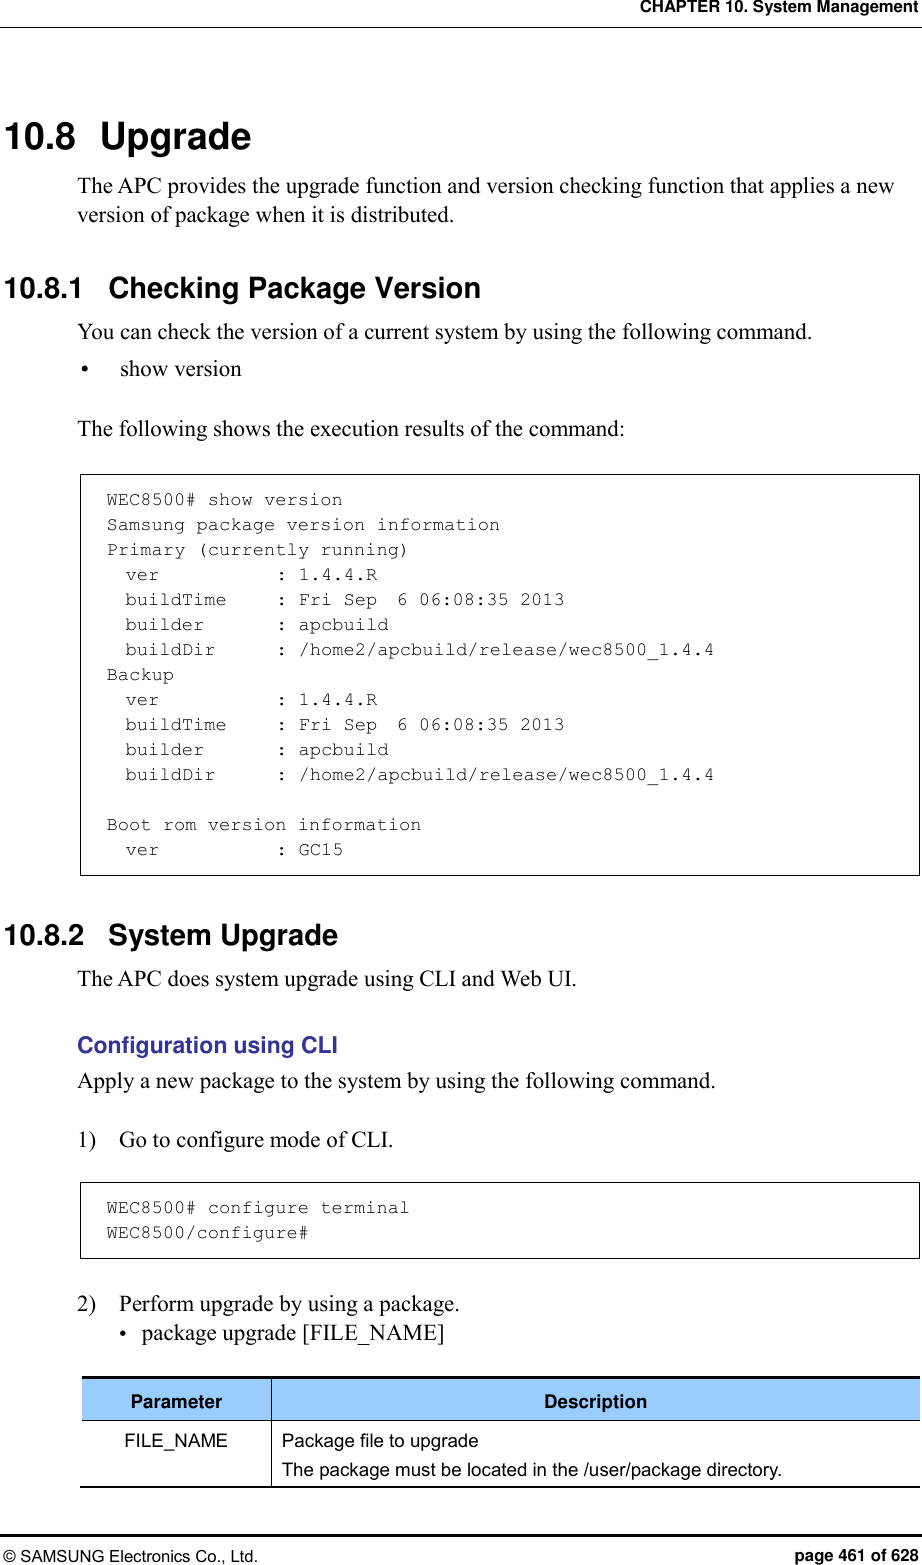 CHAPTER 10. System Management © SAMSUNG Electronics Co., Ltd.  page 461 of 628 10.8  Upgrade The APC provides the upgrade function and version checking function that applies a new version of package when it is distributed.  10.8.1  Checking Package Version You can check the version of a current system by using the following command.  show version  The following shows the execution results of the command:    WEC8500# show version Samsung package version information Primary (currently running)   ver            : 1.4.4.R   buildTime     : Fri Sep  6 06:08:35 2013   builder        : apcbuild   buildDir       : /home2/apcbuild/release/wec8500_1.4.4 Backup   ver            : 1.4.4.R   buildTime     : Fri Sep  6 06:08:35 2013   builder        : apcbuild   buildDir       : /home2/apcbuild/release/wec8500_1.4.4  Boot rom version information   ver            : GC15  10.8.2  System Upgrade The APC does system upgrade using CLI and Web UI.  Configuration using CLI Apply a new package to the system by using the following command.  1)    Go to configure mode of CLI.  WEC8500# configure terminal WEC8500/configure#  2)    Perform upgrade by using a package.    package upgrade [FILE_NAME]  Parameter Description FILE_NAME Package file to upgrade The package must be located in the /user/package directory. 